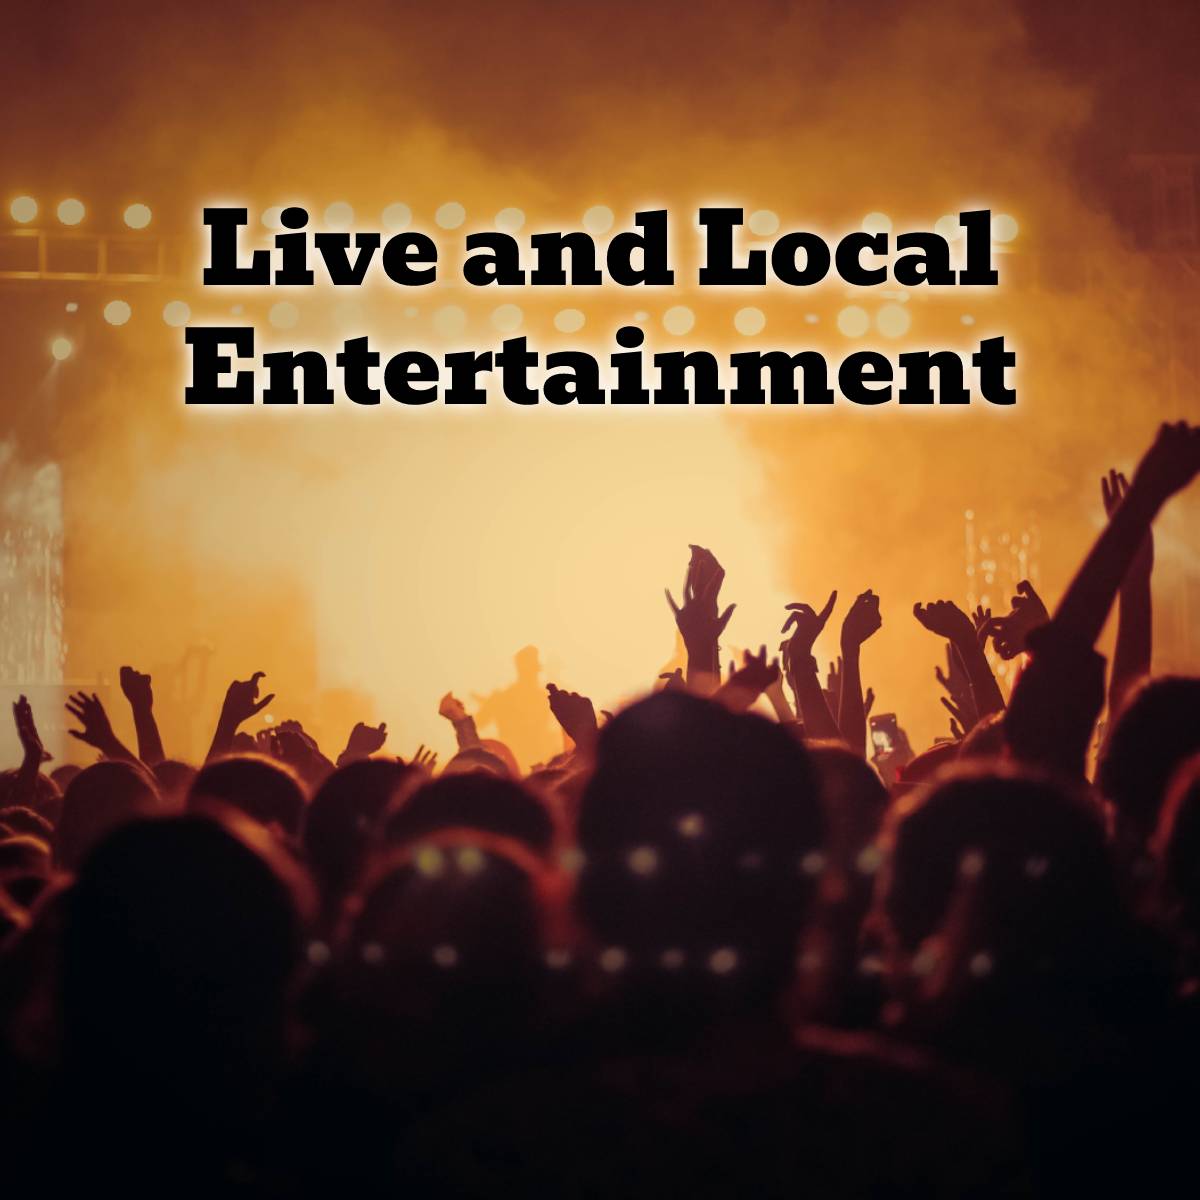 Live and Local Entertainment